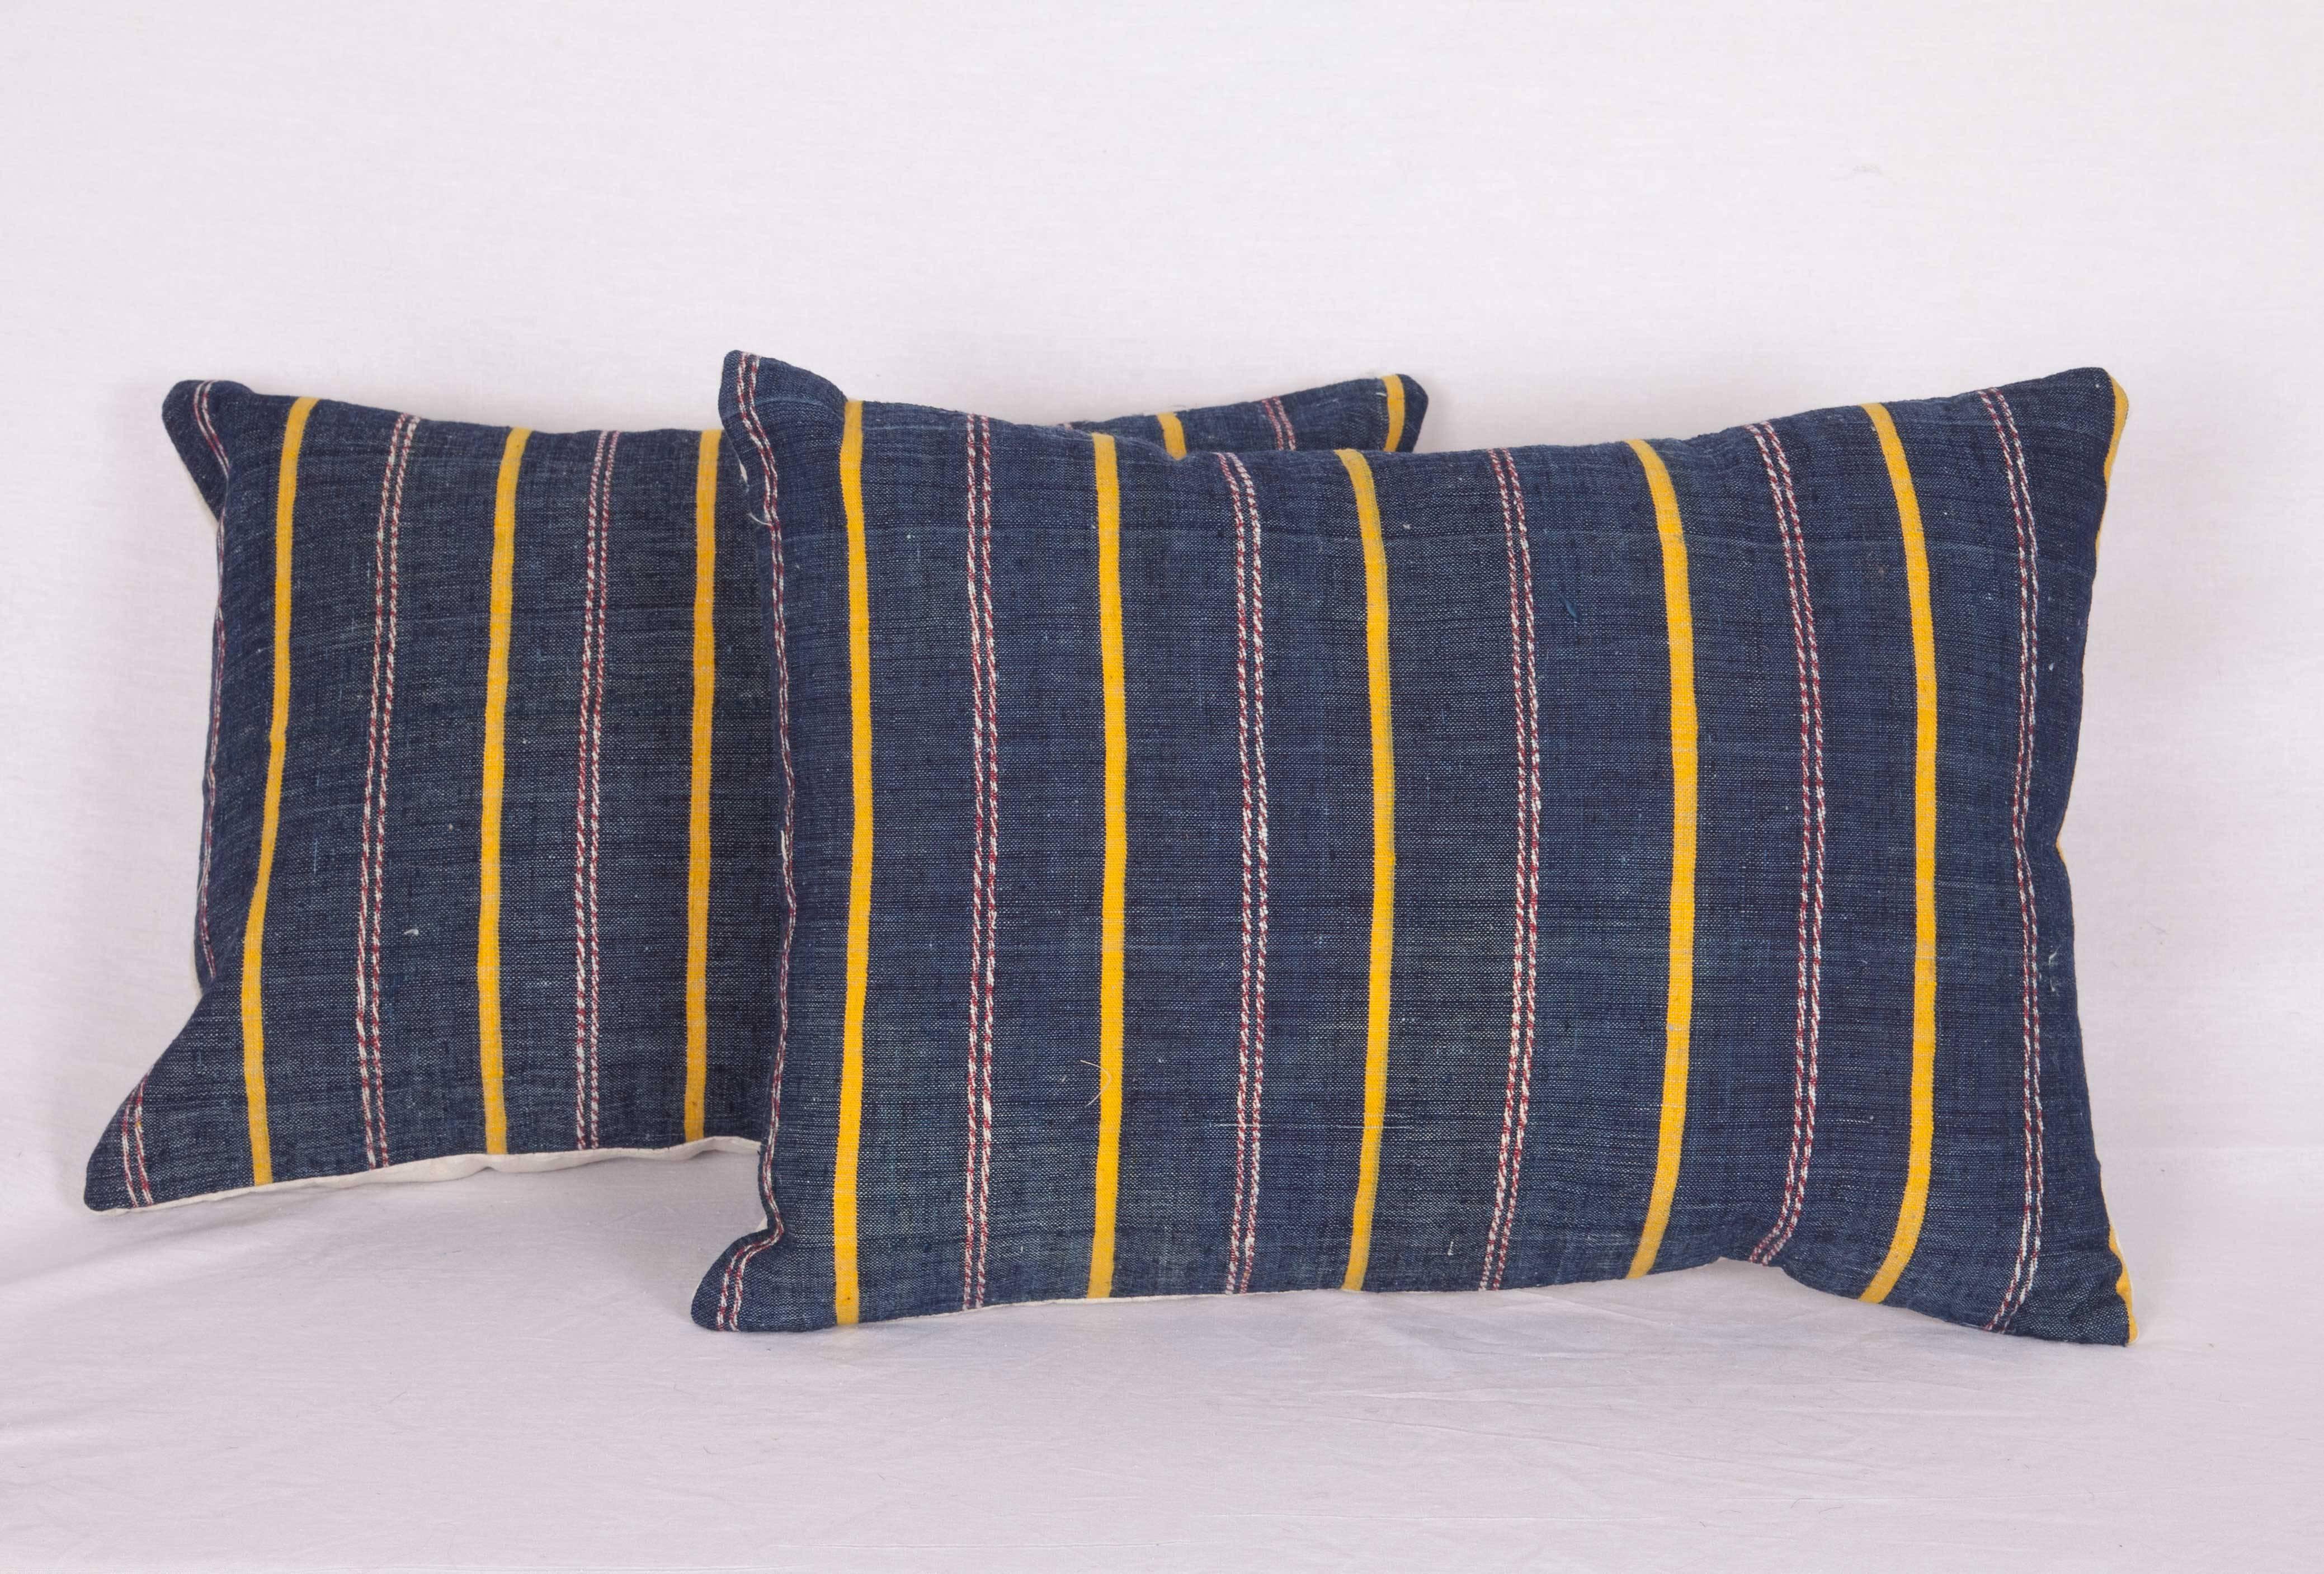 Woven Pillow Cases Fashioned Out of an Mid-20th Century Anatolian Kilim For Sale